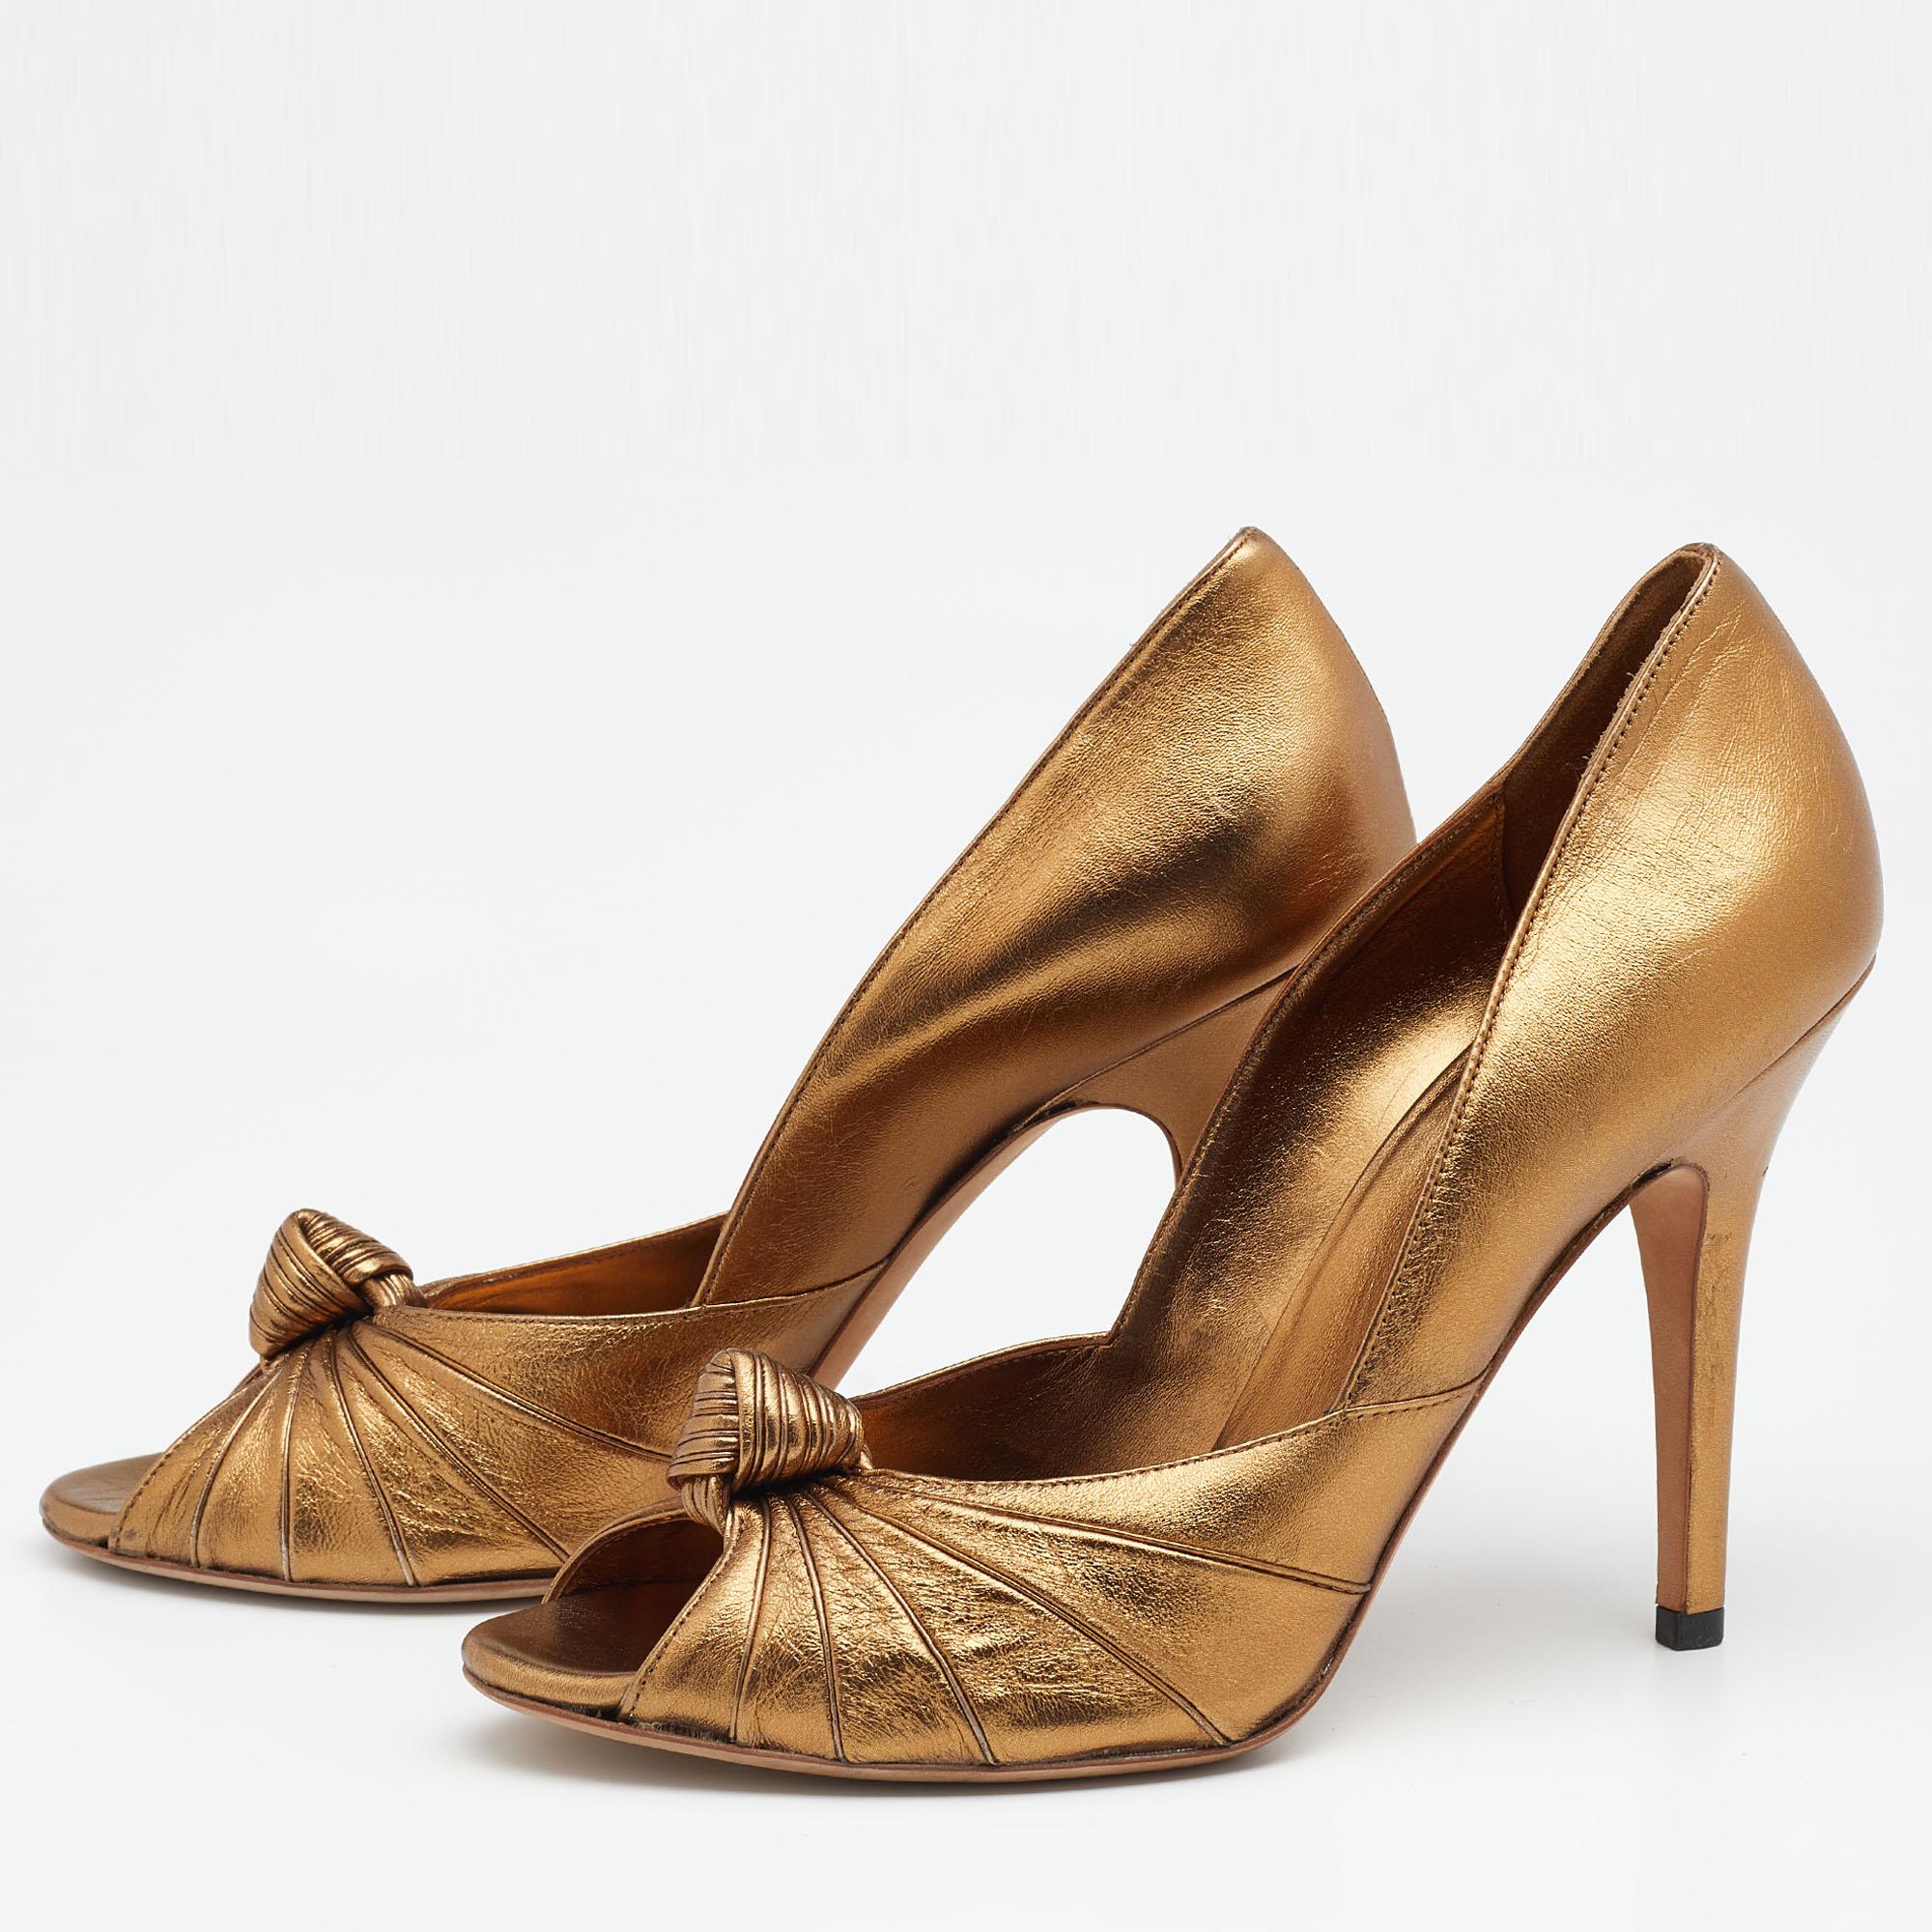 The 11.5cm heels of this pair of Gucci pumps will reflect grace and elegance in every step. Created from gold leather, it is made attractive with a knotted design on the vamps and flaunts a slip-on fitting.

Includes: Original Dustbag, Original Box,